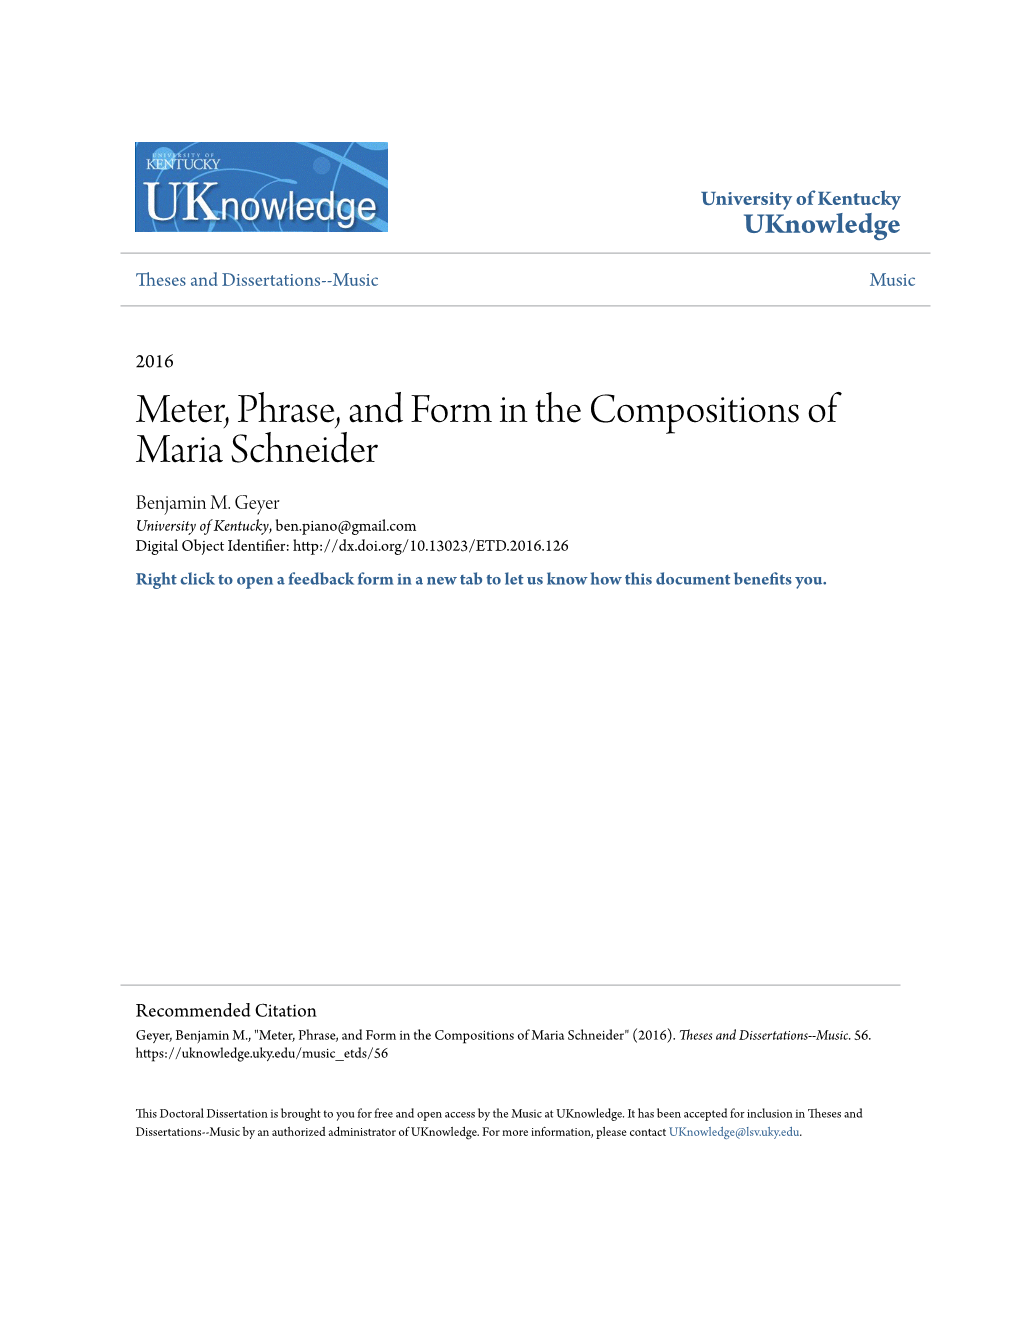 Meter, Phrase, and Form in the Compositions of Maria Schneider Benjamin M